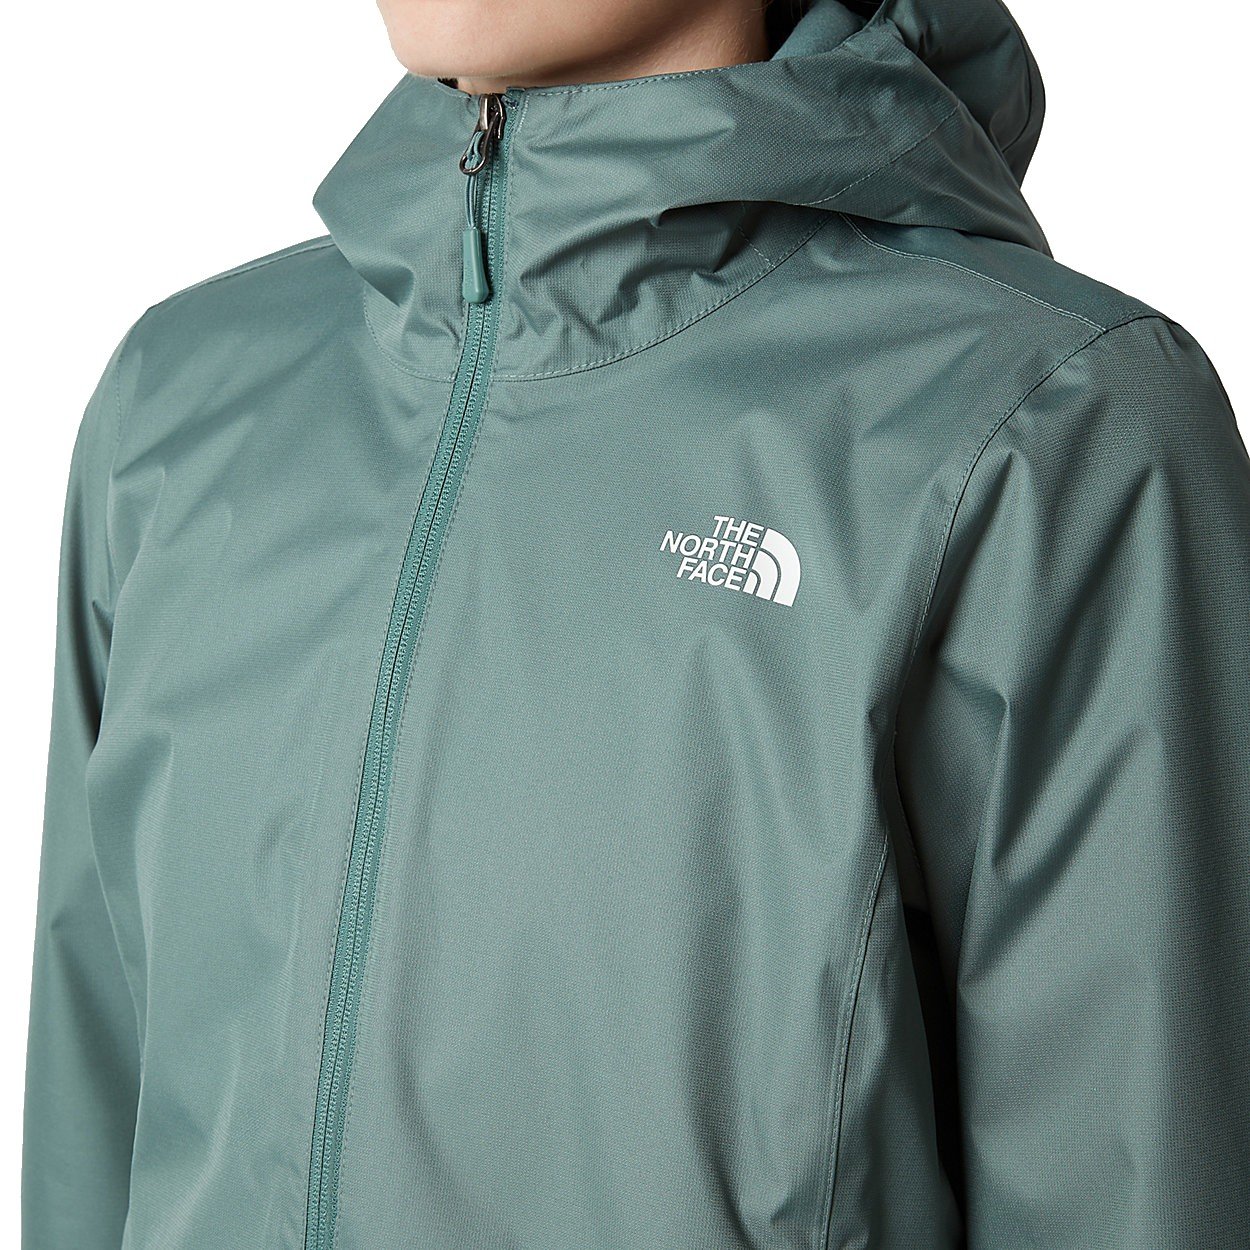 The North Face Quest Women's Hooded Waterproof Jacket